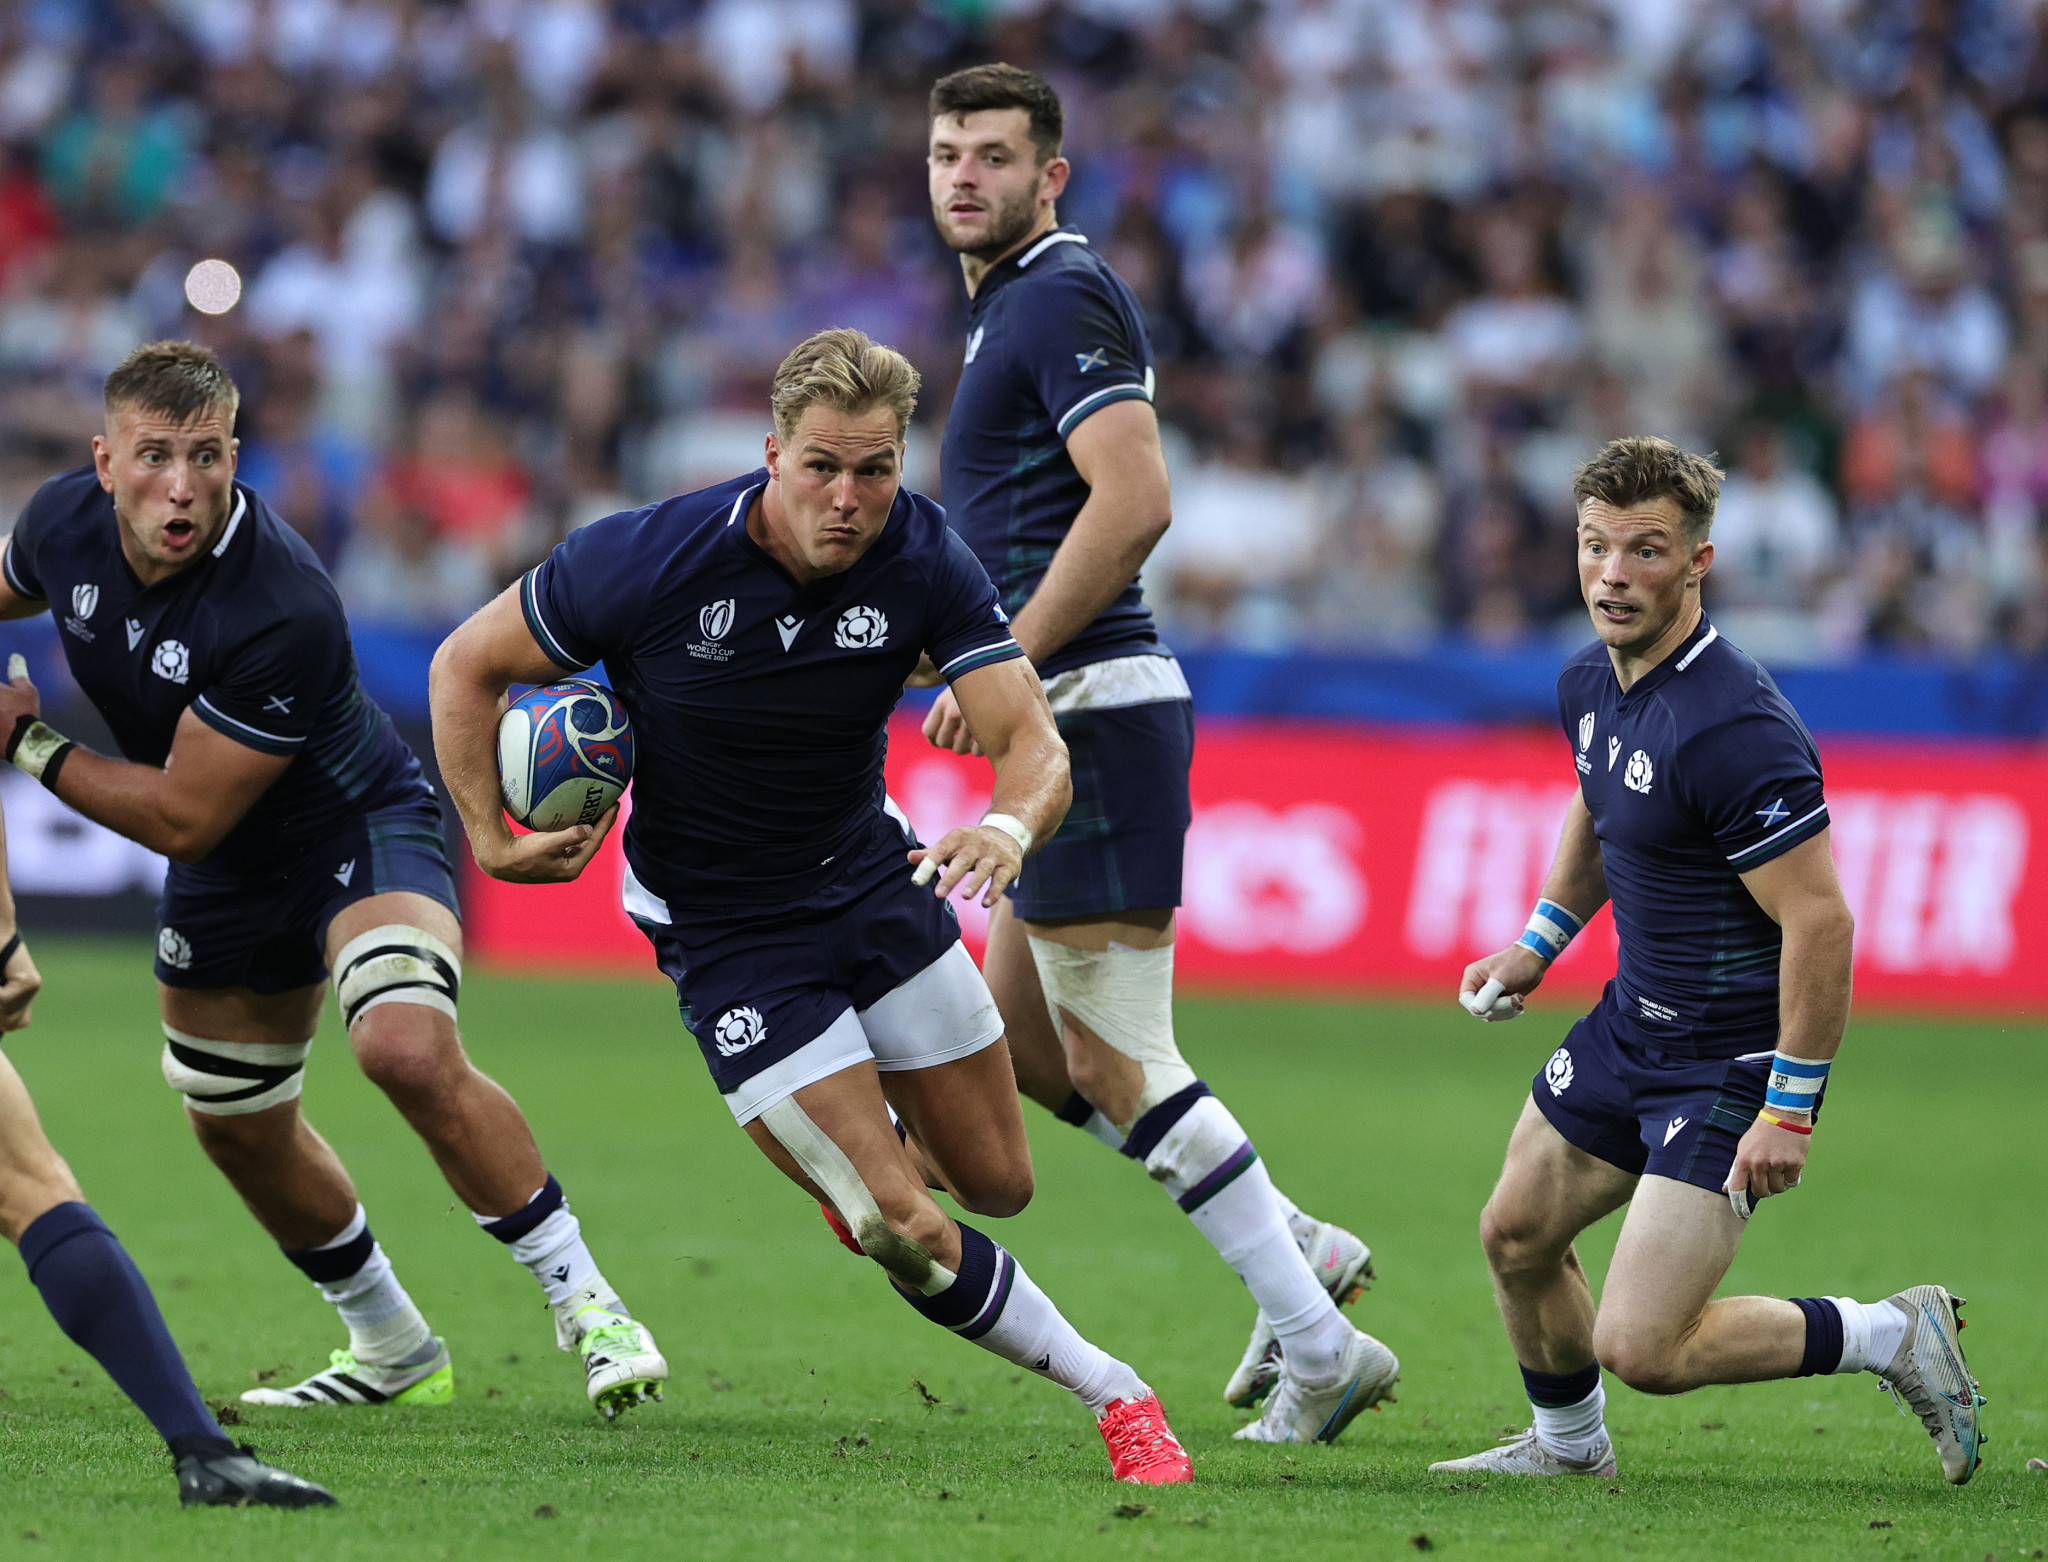 Duhan Van Der Merwe was among the first-half try scorers as Scotland secured the bonus point before the interval ©Getty Images  